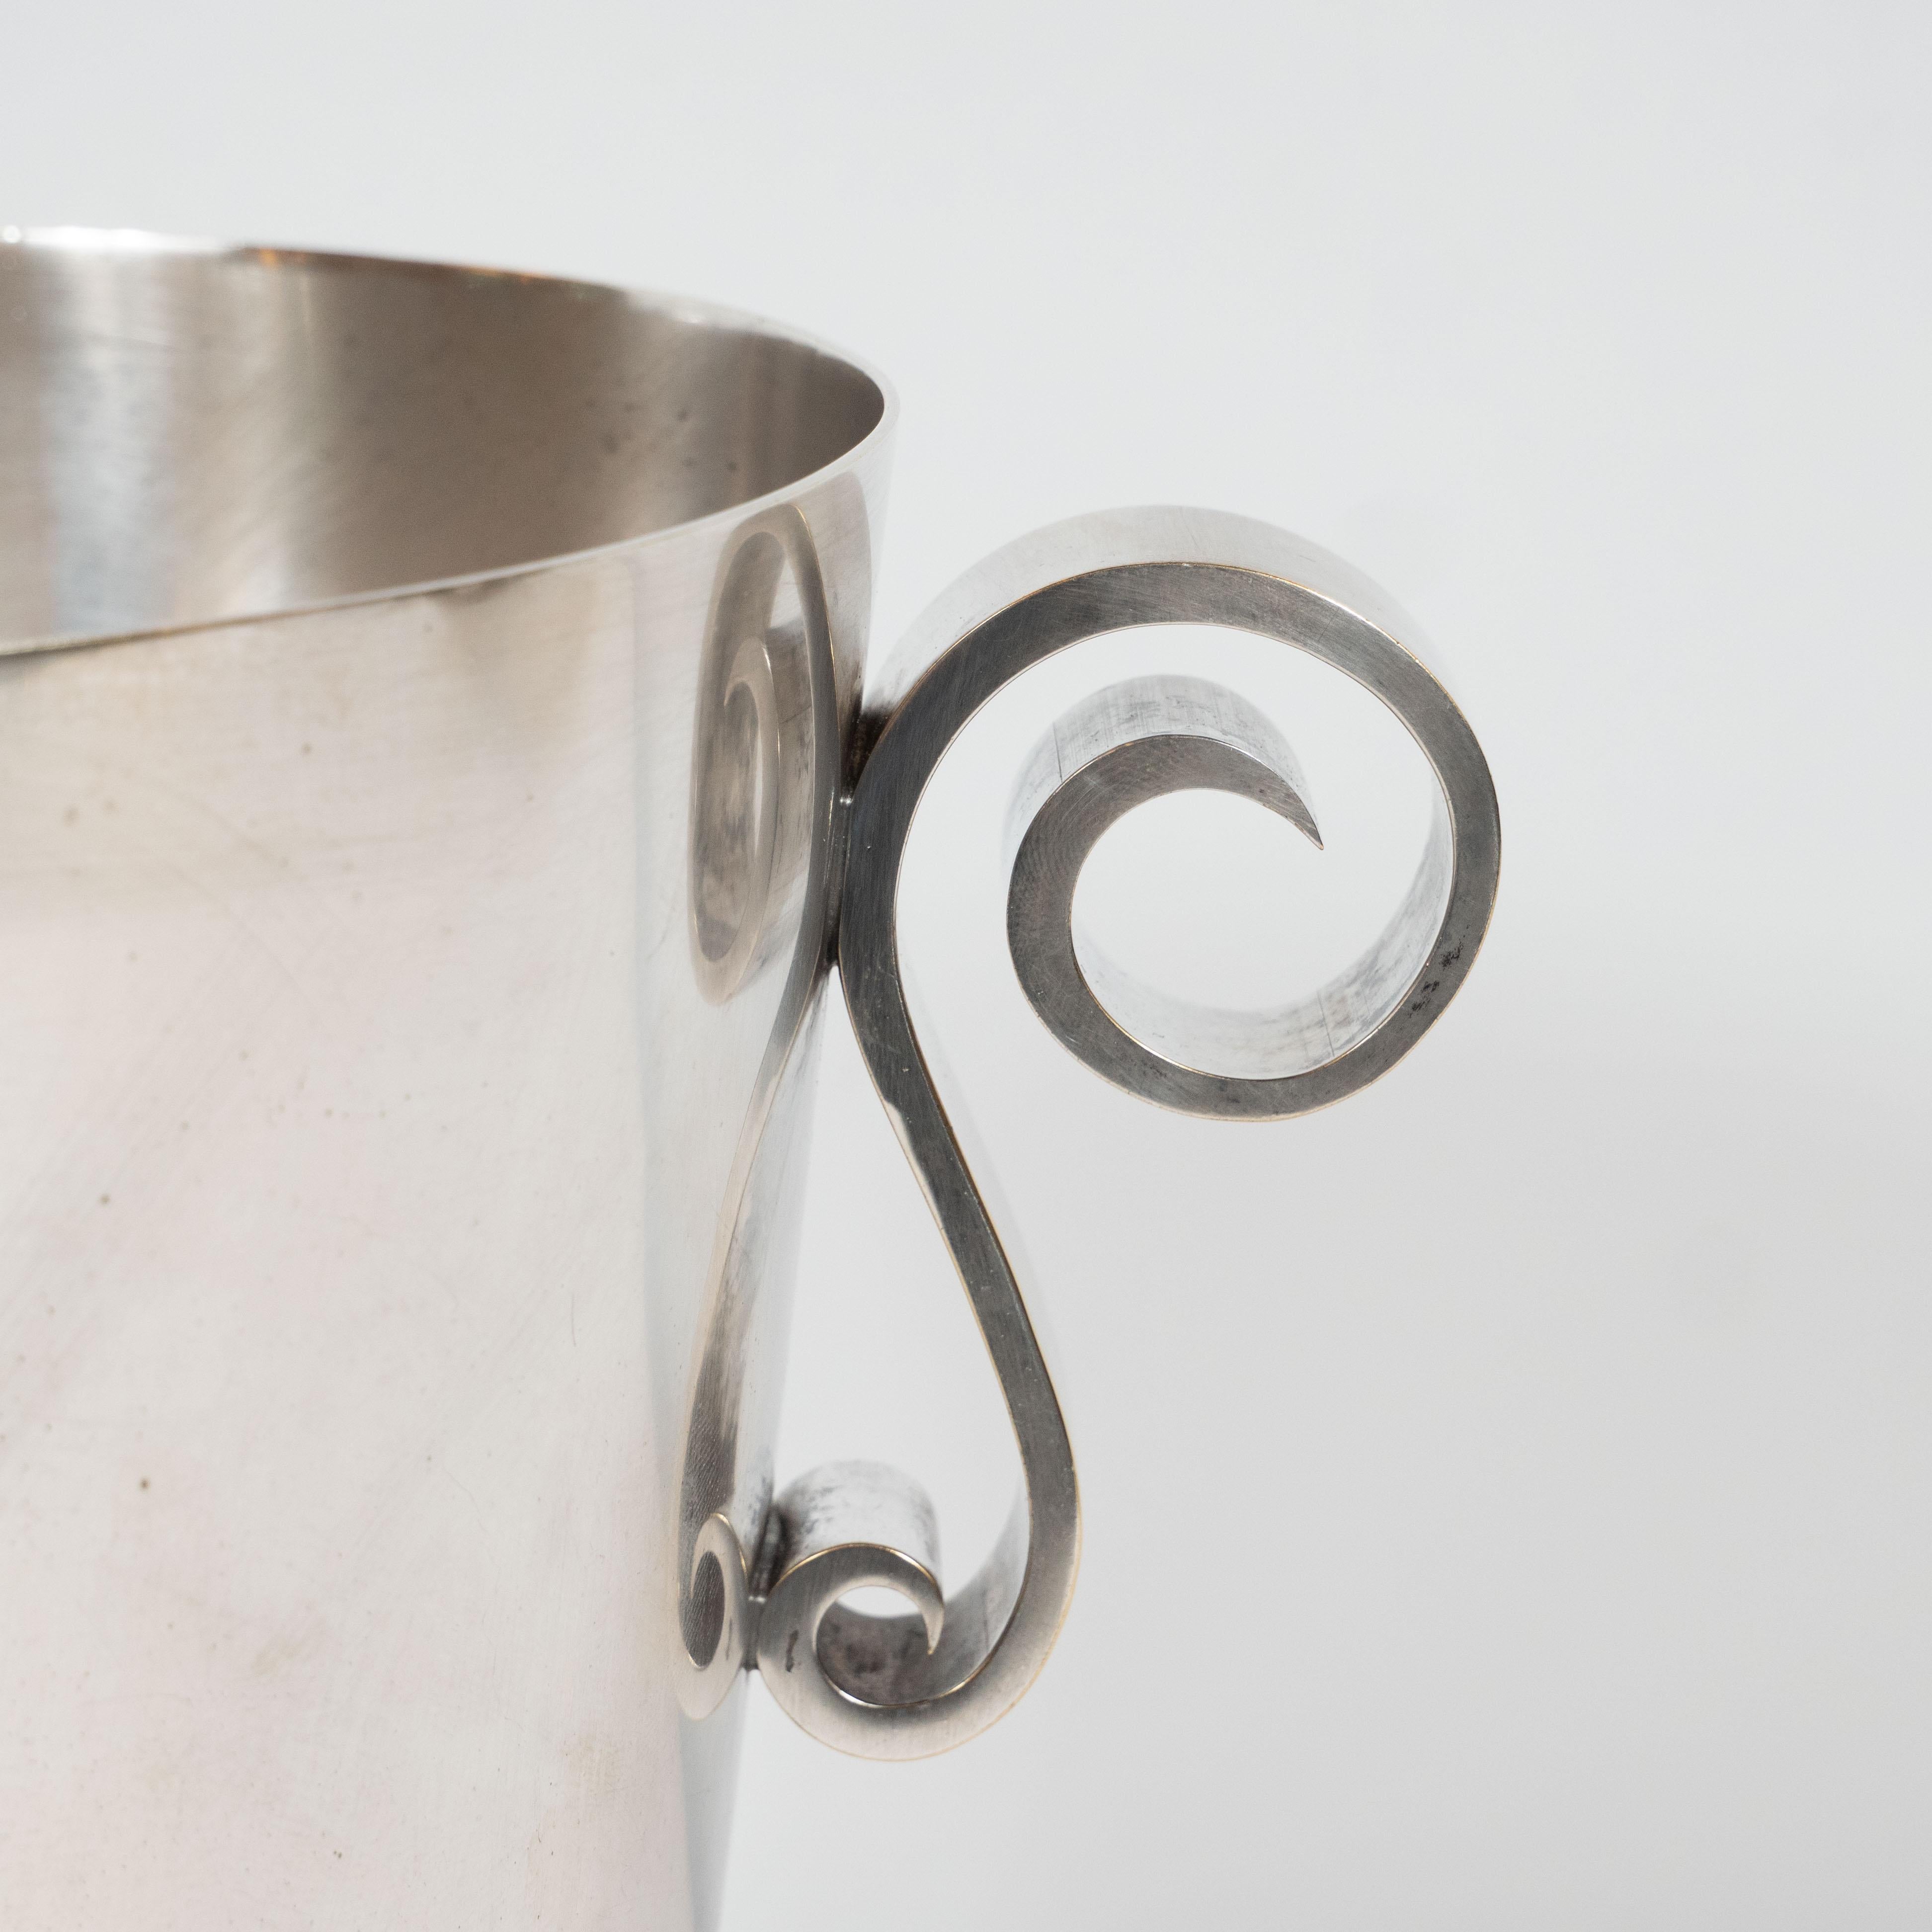 This French Art Deco silver plated ice bucket was produced circa 1935. A series of stacked pleats circumscribe the perimeter of the base of the ice bucket creating a dynamic profile. The top half of the bucket is left unadorned except for two